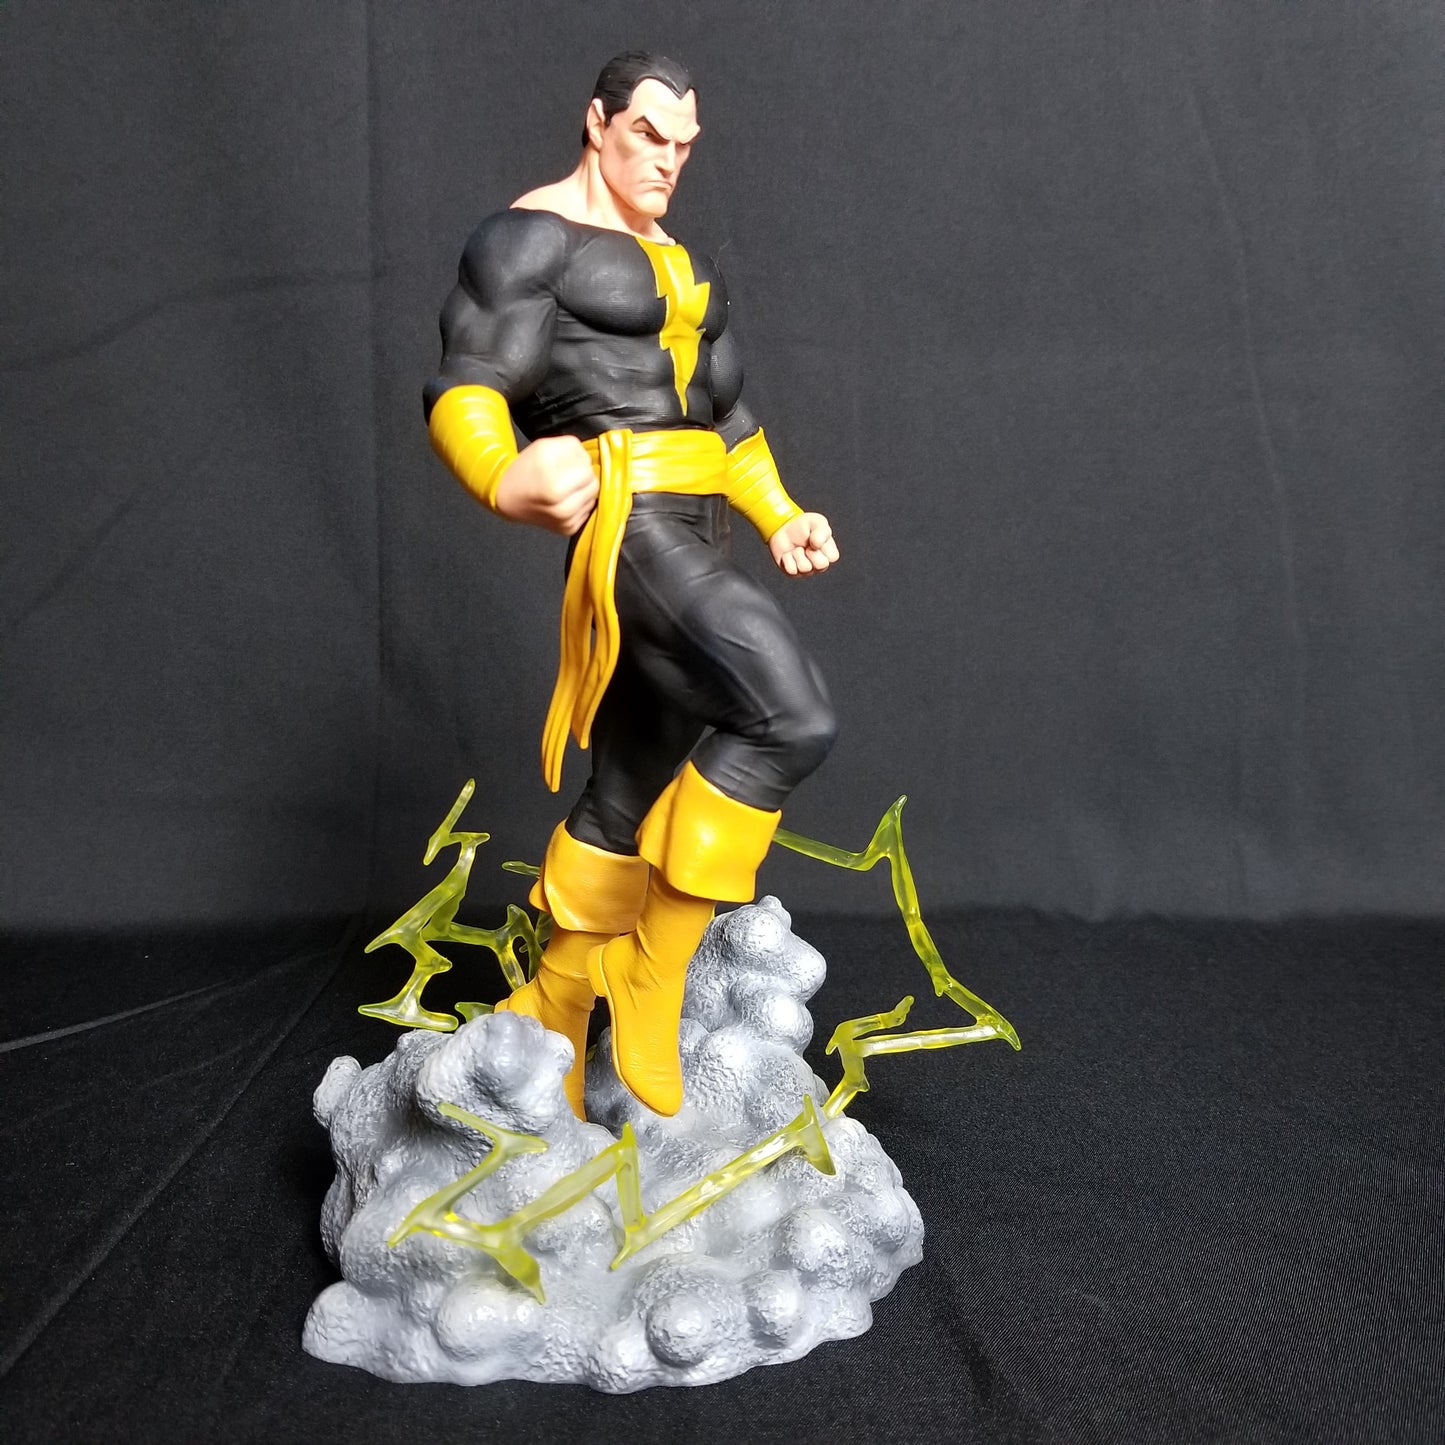 Getting ready for his big-screen debut, Black Adam smashes his way out of the Shazam/Captain Marvel mythos and into the DC Gallery Diorama line of sculptures! Hovering above the ground with lightning crackling around him, this approximately 11-inch sculpture of Teth-Adam features a removable cape, and is made of high-quality PVC with detailed sculpting and paint applications.